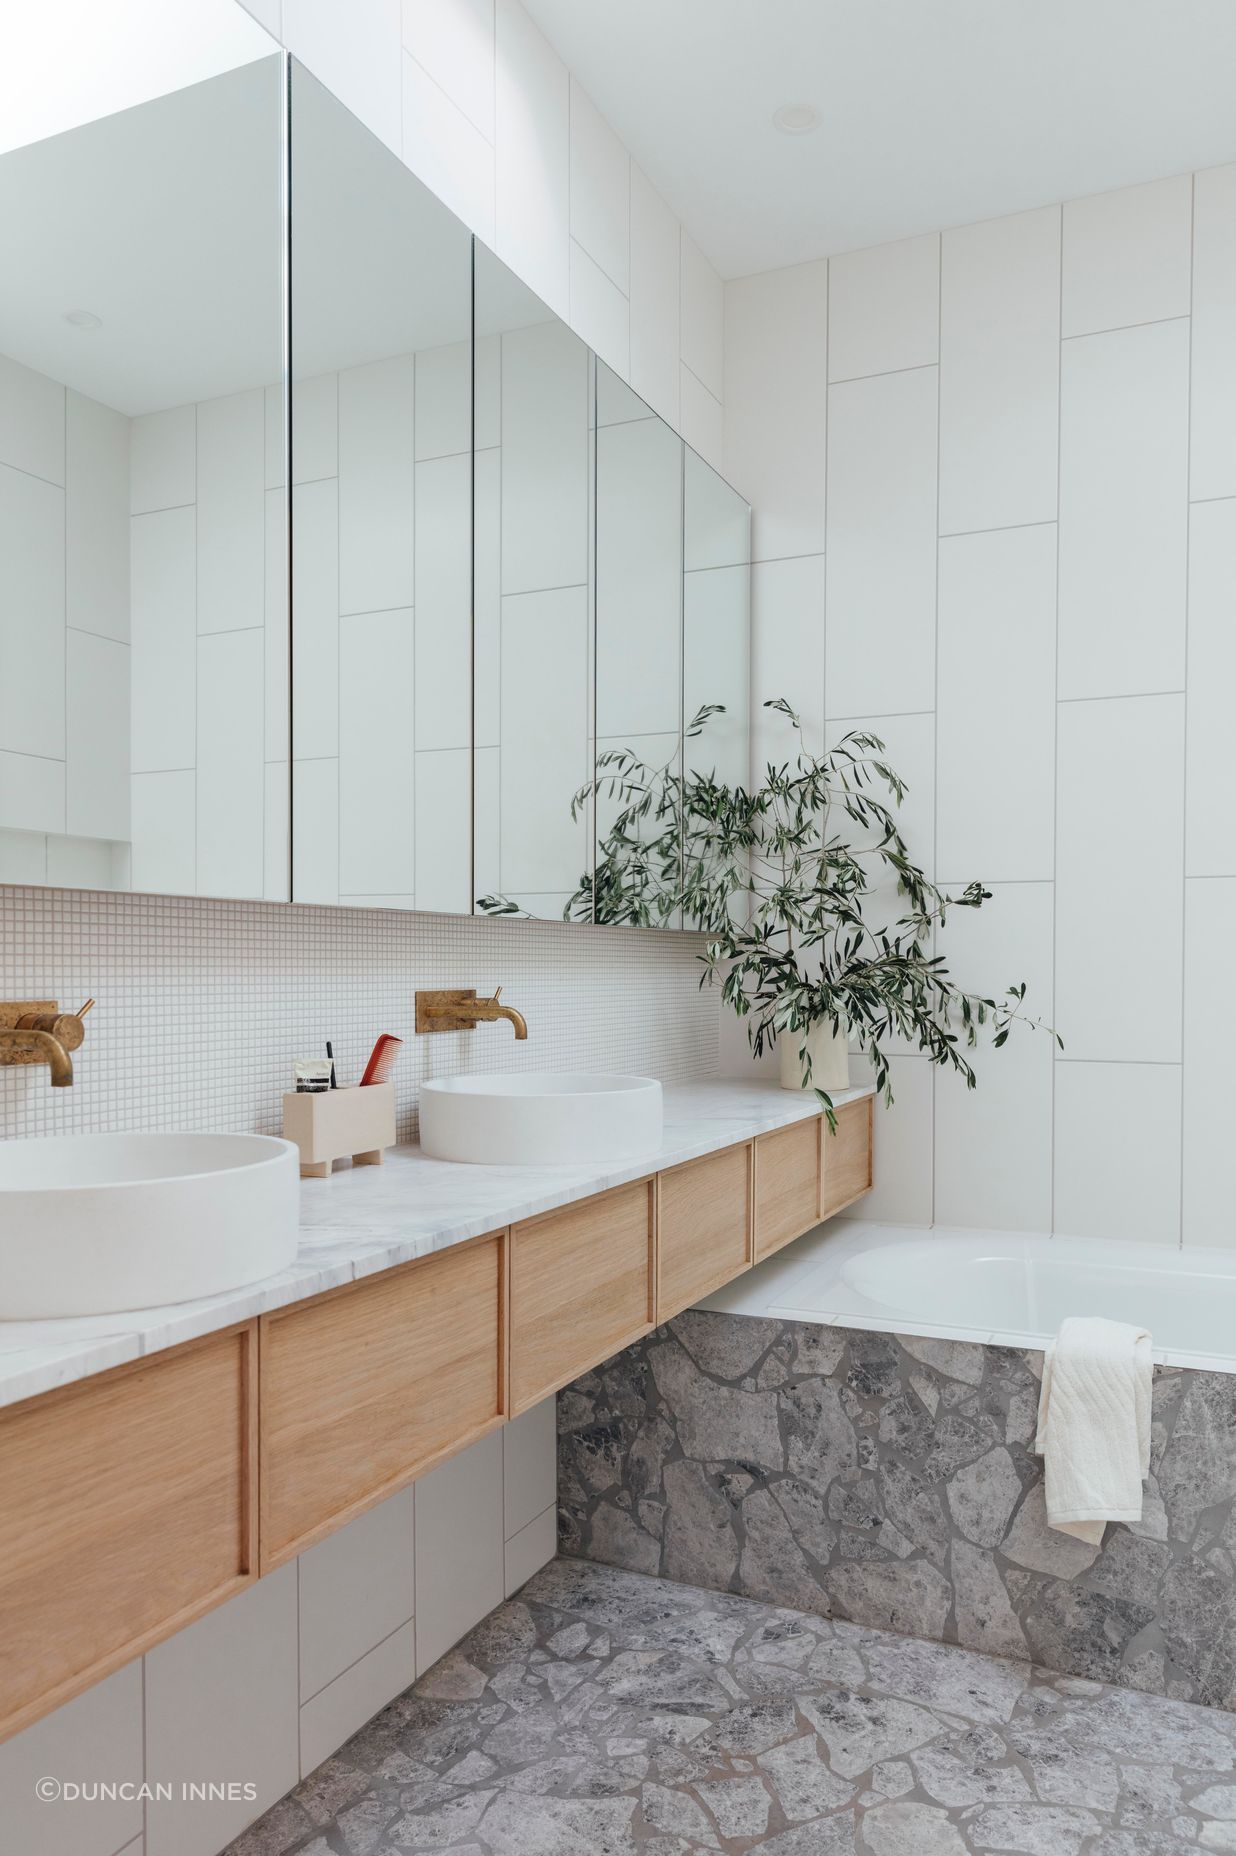 An ensuite uses a light, fresh material palette.